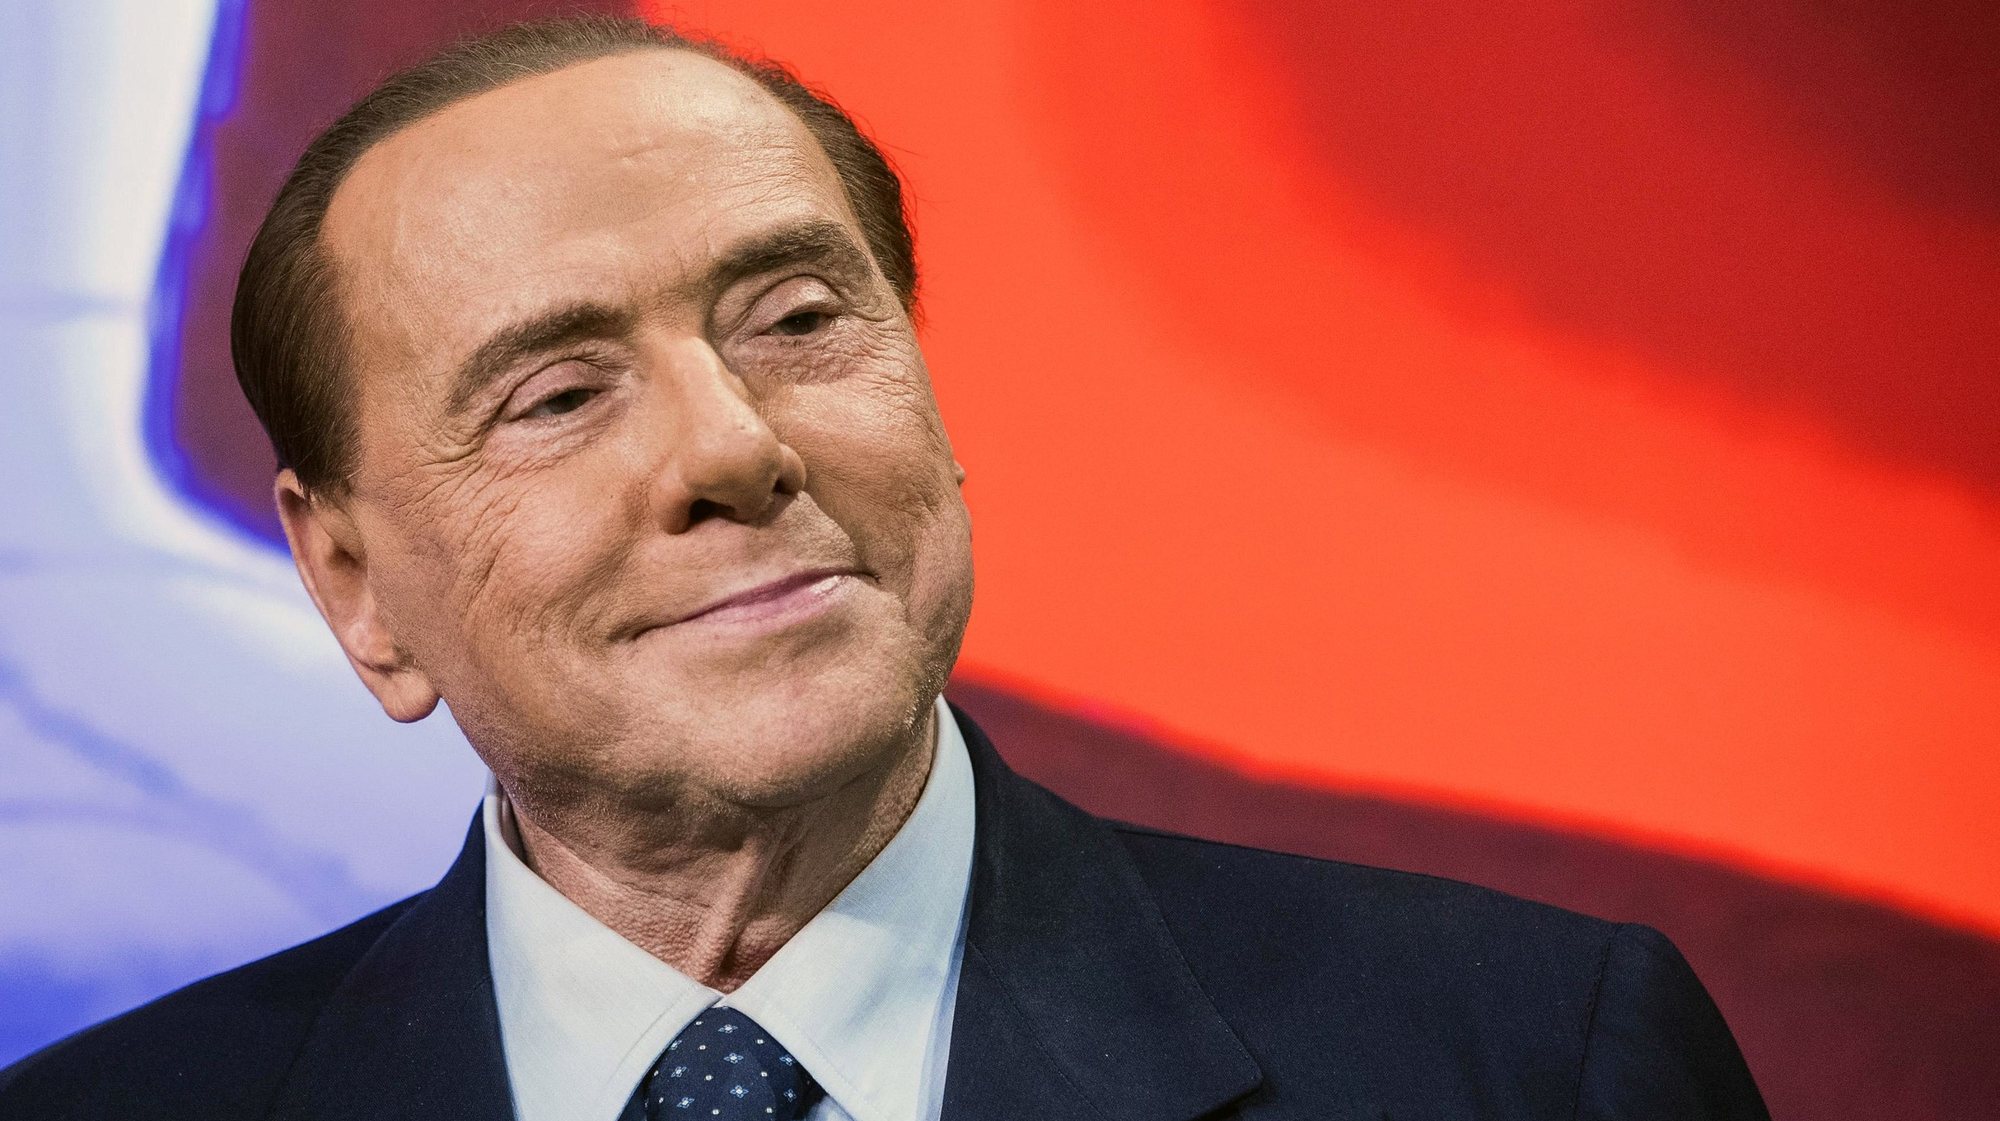 epa09093317 (FILE) - Italian former prime minister and leader of &#039;Forza Italia&#039; party Silvio Berlusconi during the recording of LA7 program &#039;Bersaglio Mobile&#039; hosted by journalist Enrico Mentana, in Rome, Italy, 02 March 2018 (reissued 24 March 2021). Forza Italia party leader Silvio Berlusconi has been admitted to a Milan hospital since 22 March 2021 with &#039;health problems&#039;, his lawyer said on 24 March 2021.  EPA/ANGELO CARCONI